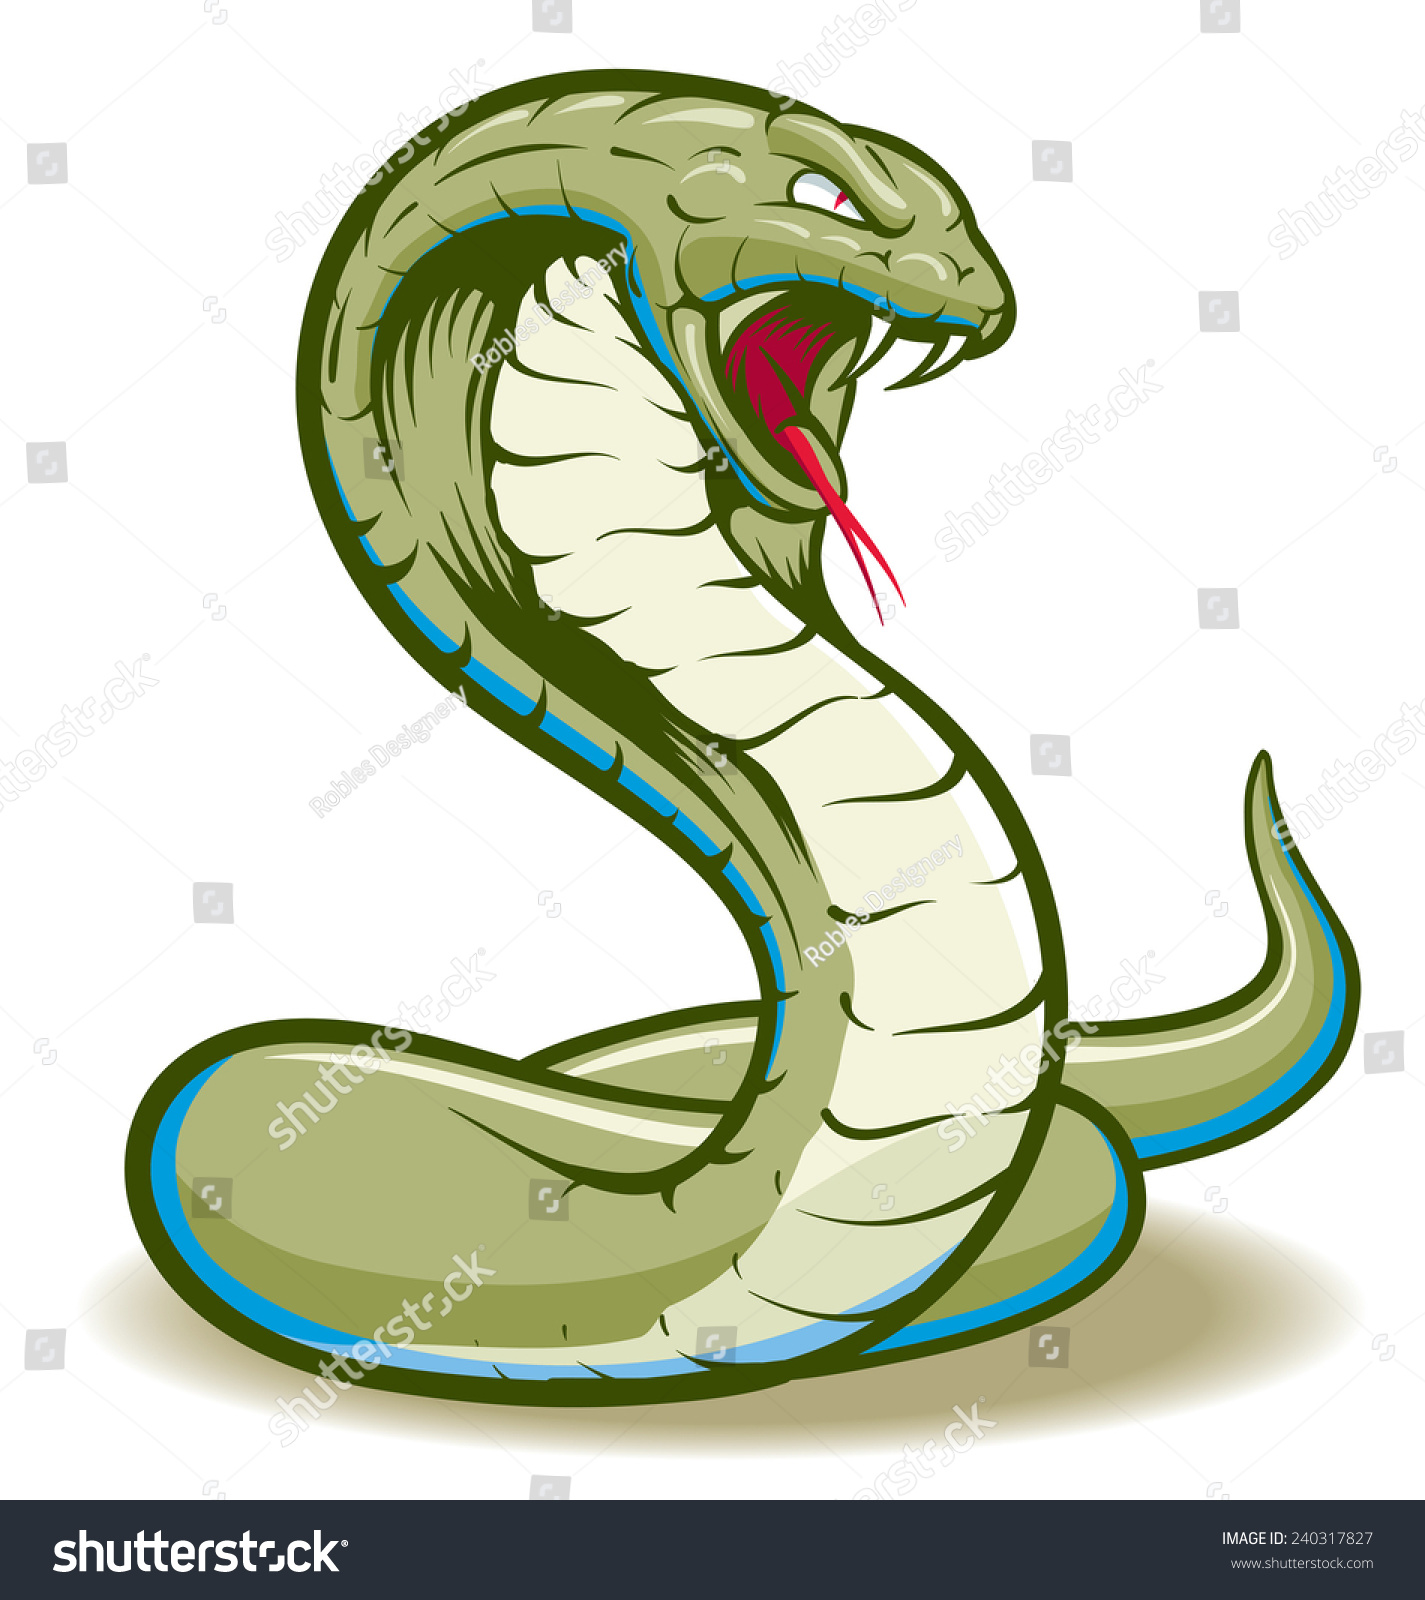 SVG of Cobra Snake curled and ready to strike showing fangs and tongue svg